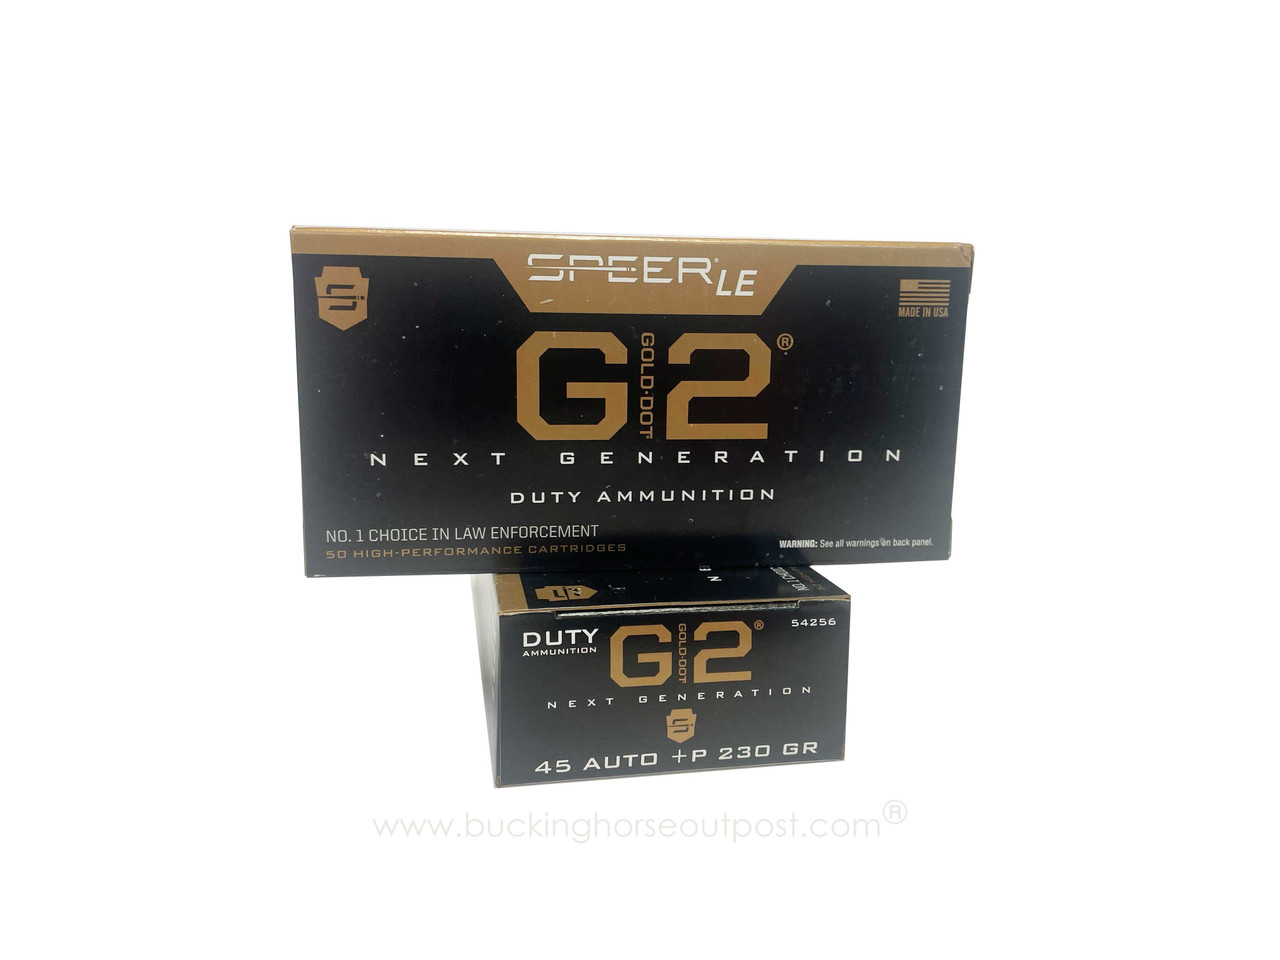 Speer Gold Dot G2 .45 Auto (+ P) 230 Grain Jacketed Hollow Point 50rds Per Box (54256)- FREE SHIPPING ON ORDERS OVER $175